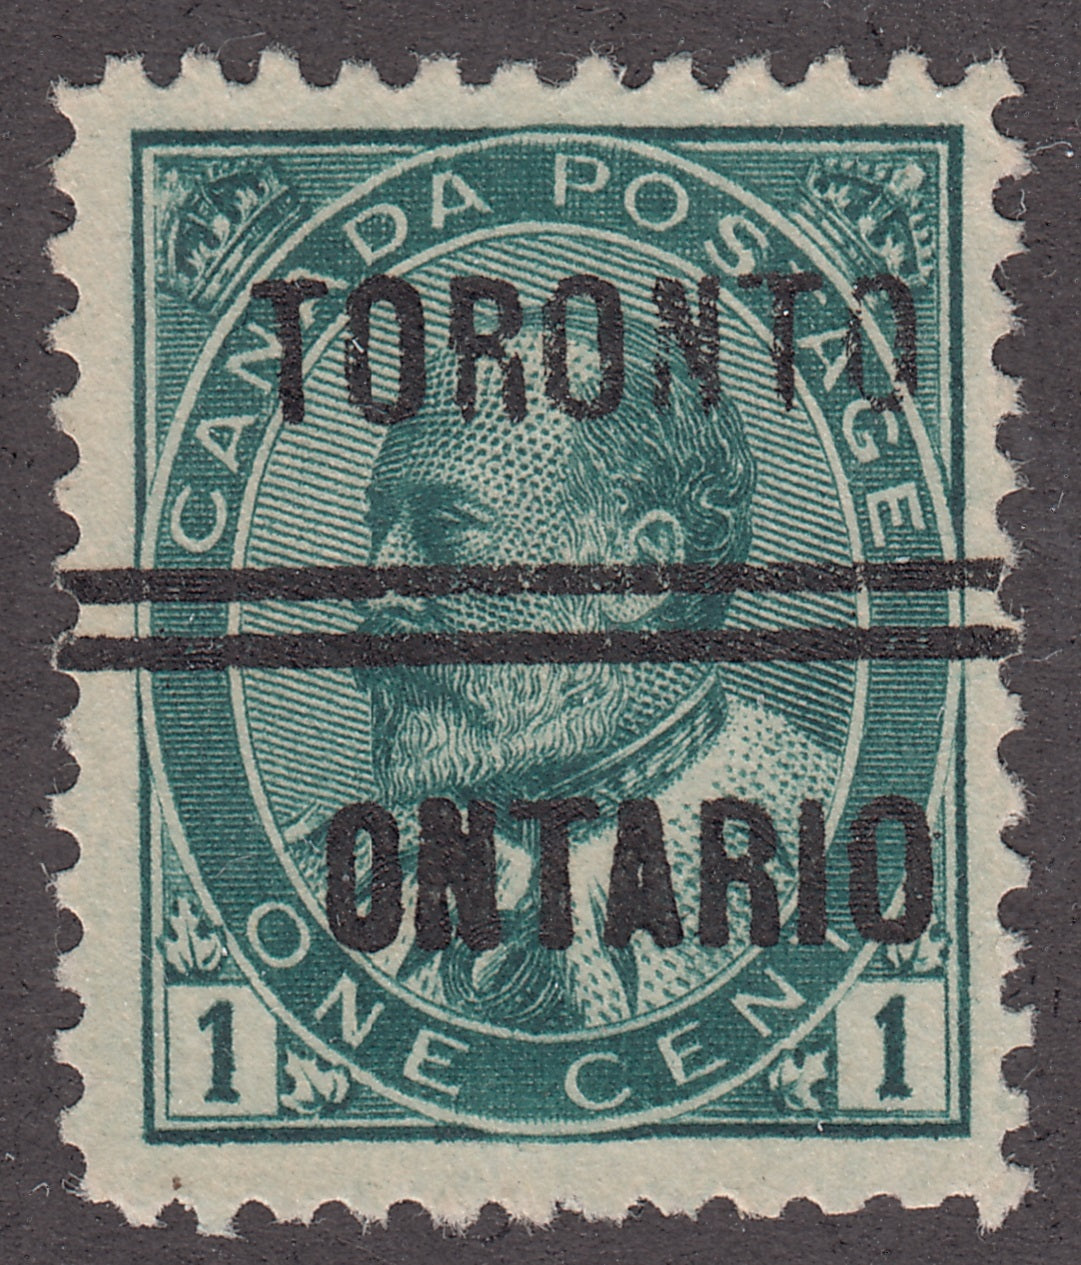 0089CA2101 - Canada #89 - Used, Re-entry